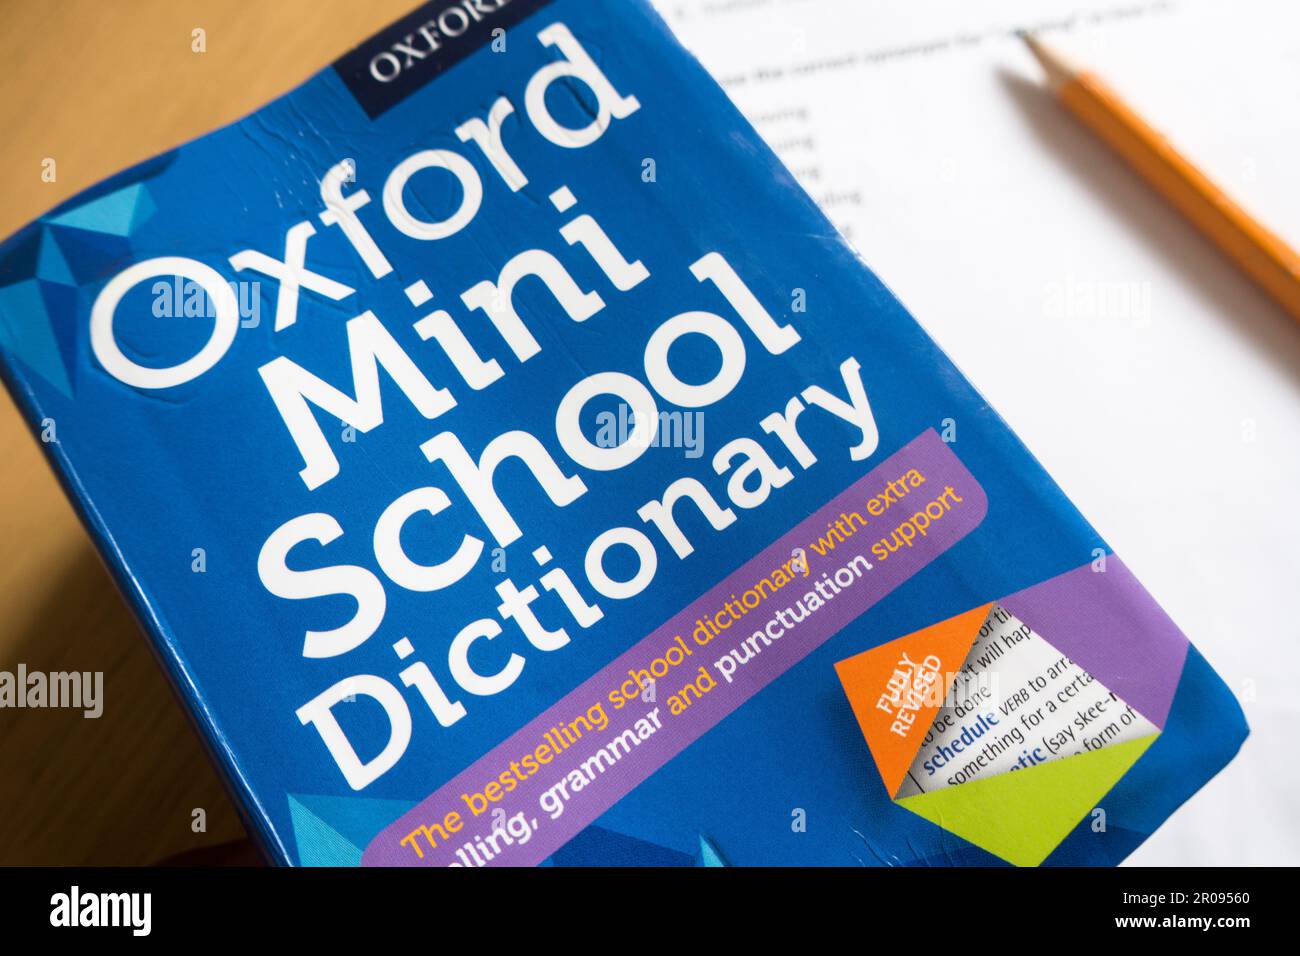 Oxford English Dictionary on table next to study material Stock Photo